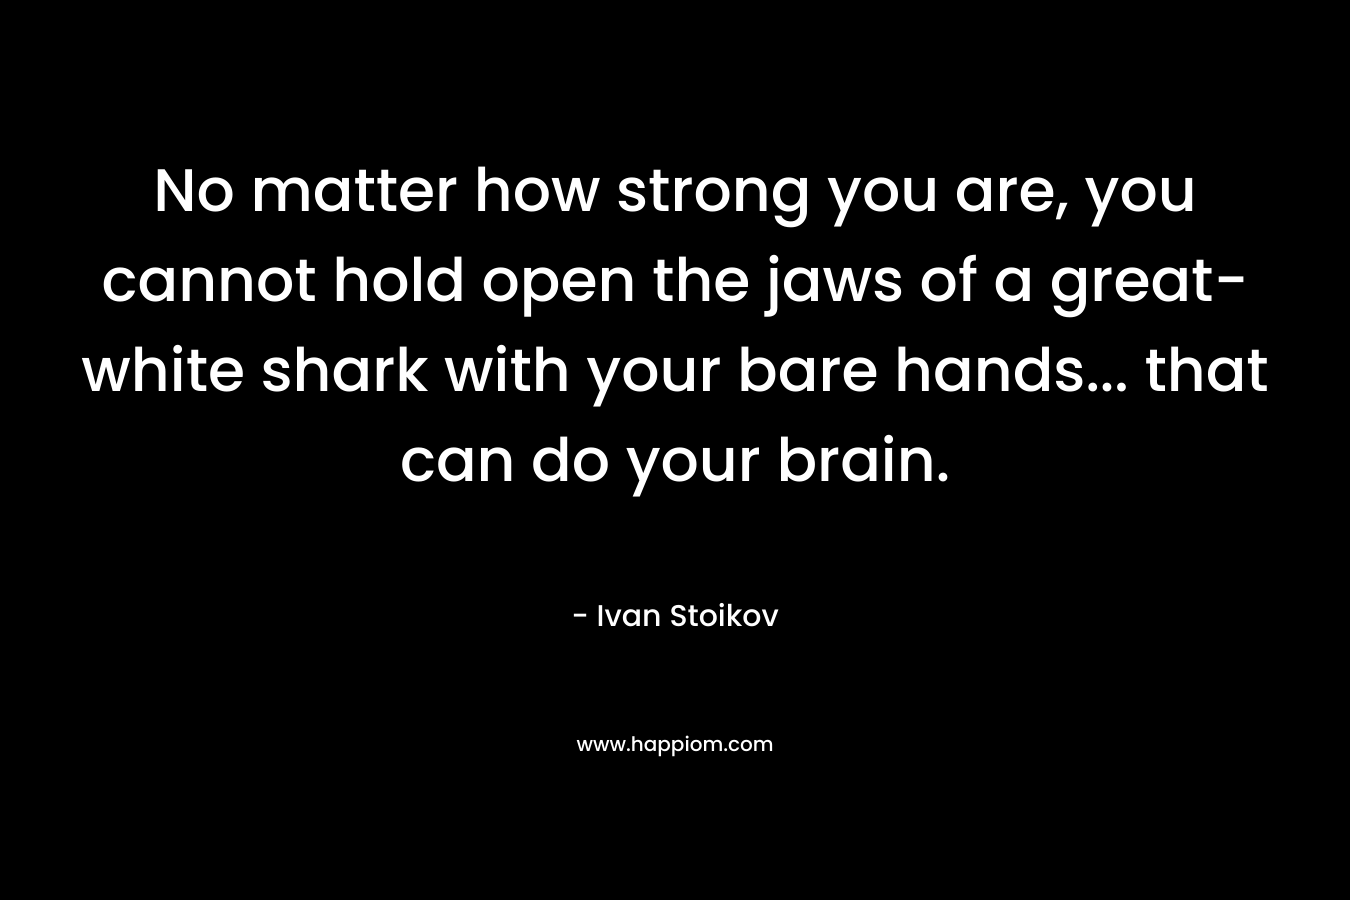 No matter how strong you are, you cannot hold open the jaws of a great-white shark with your bare hands... that can do your brain.